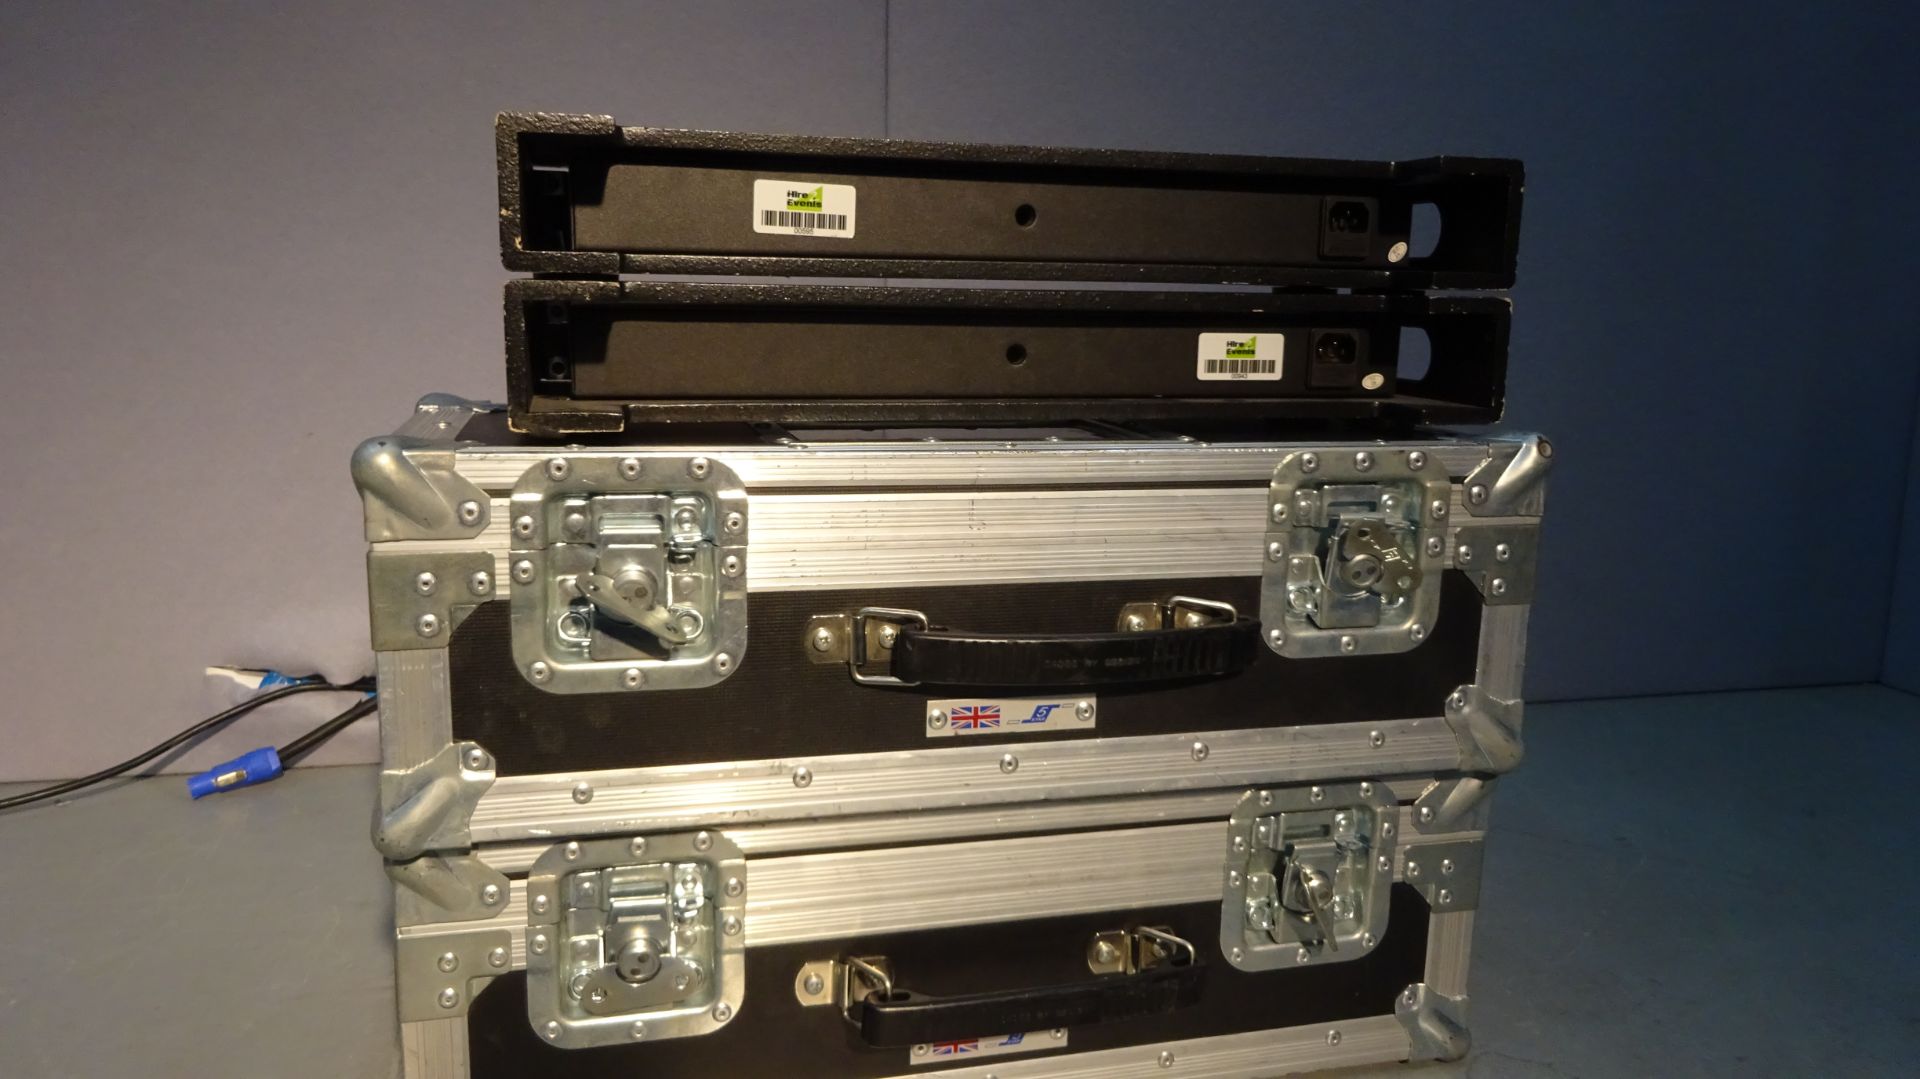 2 x Chauvet DMX Buffer Data Stream 4 1 in 4 out 3pin or 5pin c/w mains lead & Flight Case - Image 4 of 7